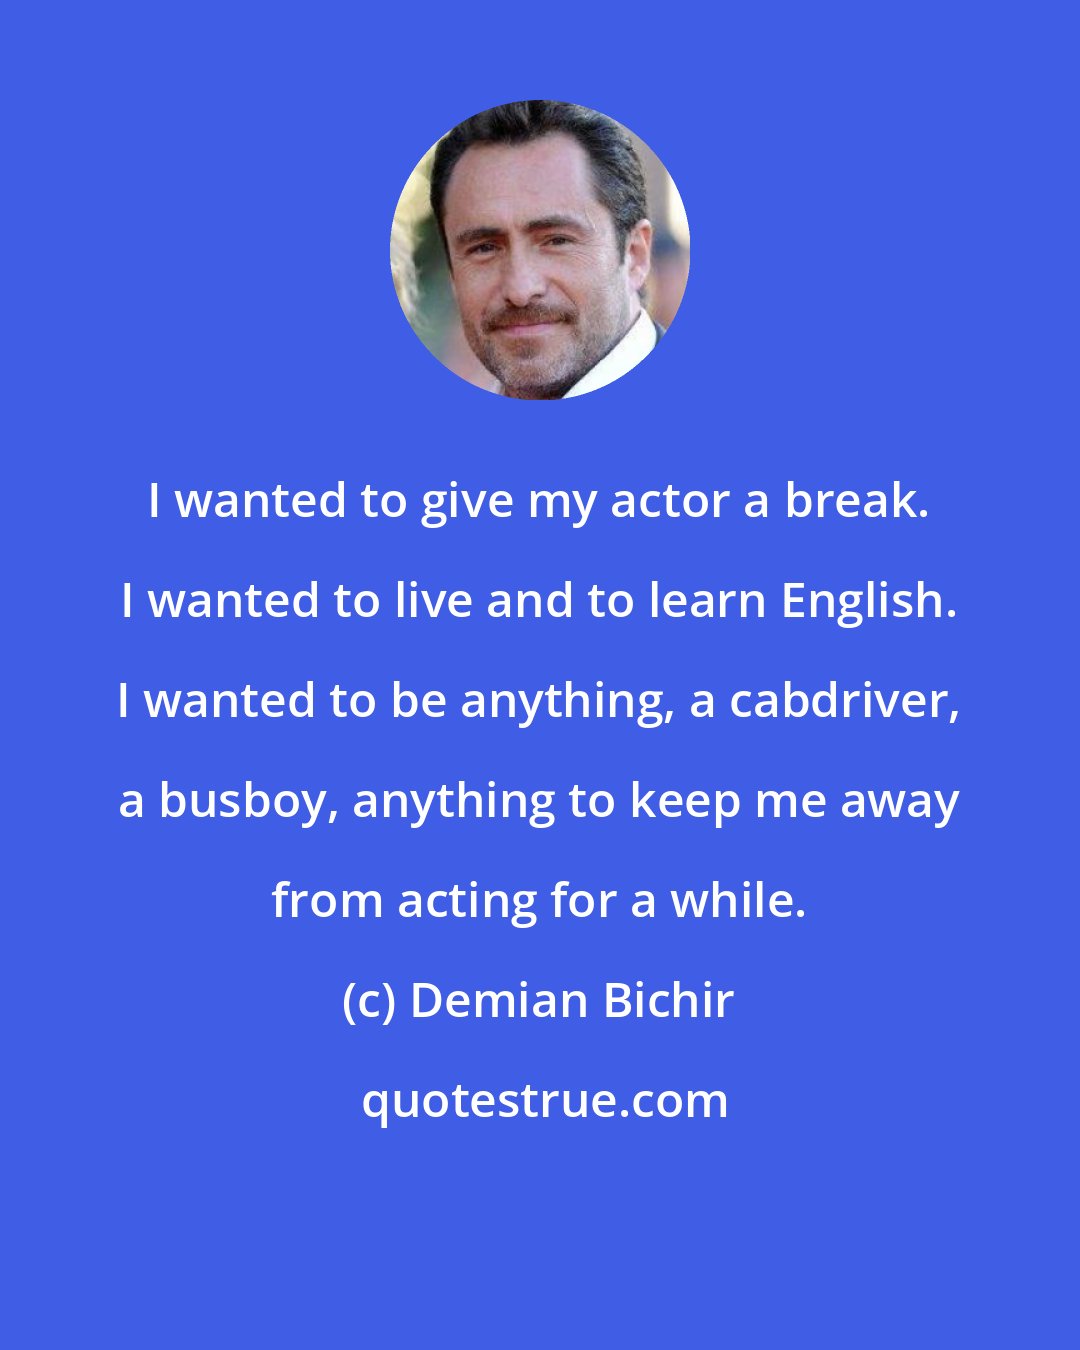 Demian Bichir: I wanted to give my actor a break. I wanted to live and to learn English. I wanted to be anything, a cabdriver, a busboy, anything to keep me away from acting for a while.